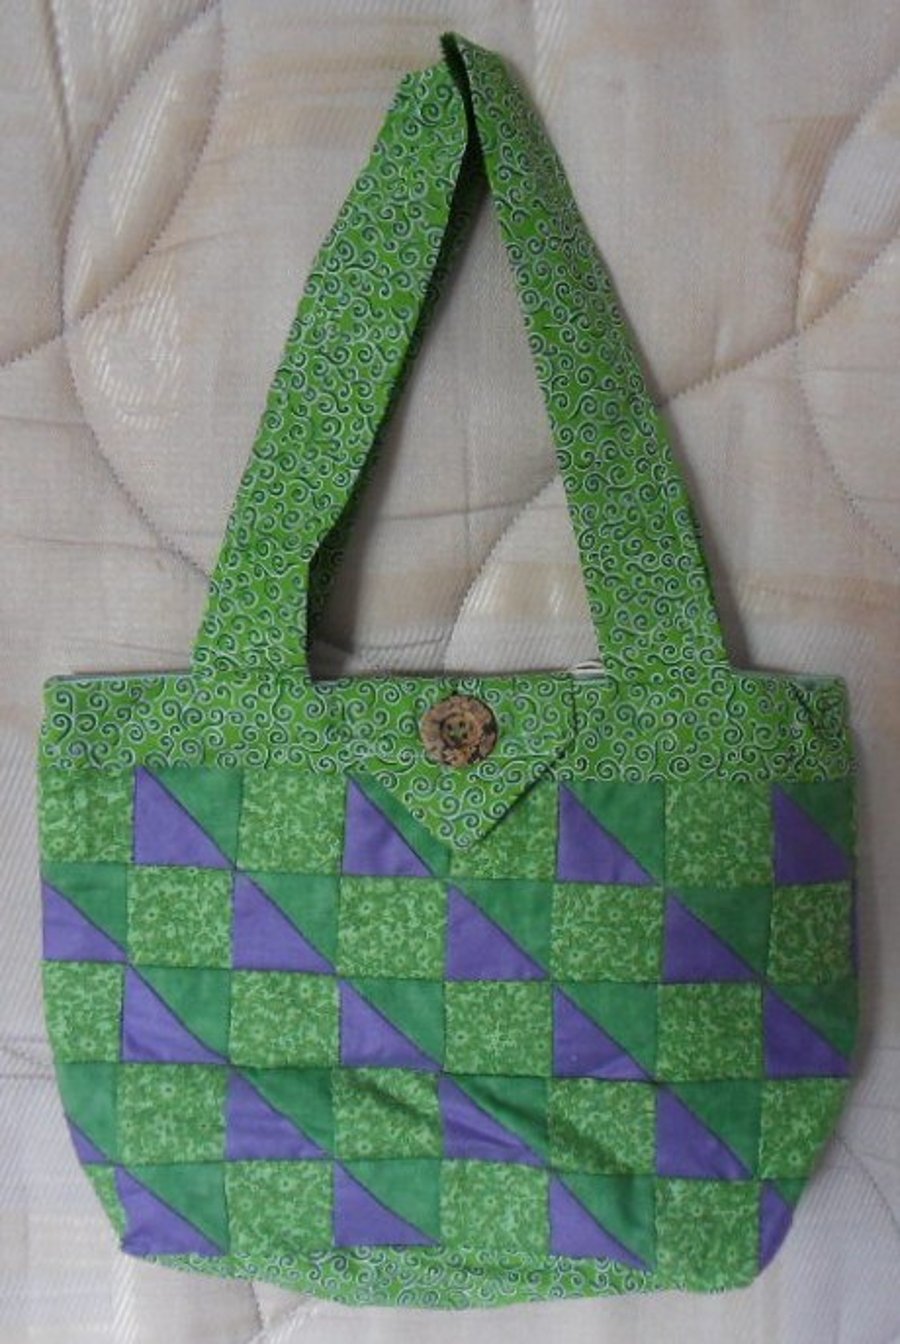 Homemade Tote bag.  Purple and green patchwork design. 11 half" x 8"